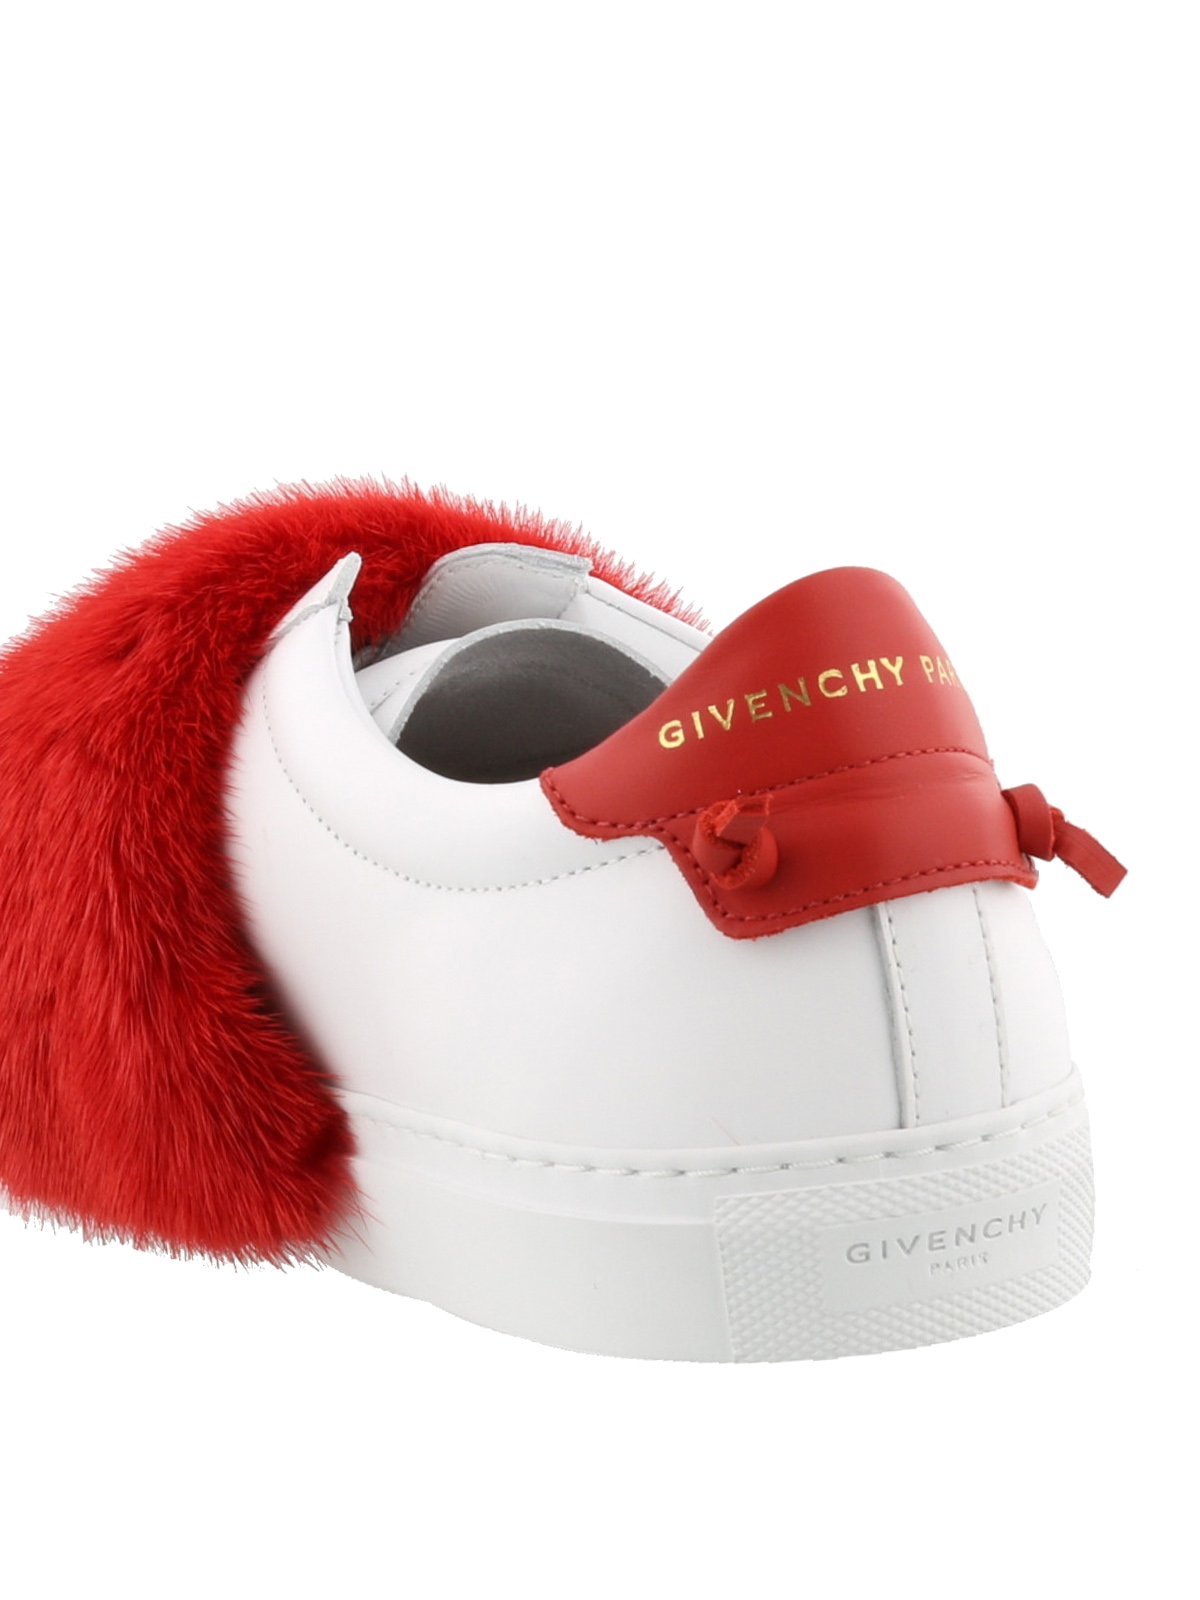 Givenchy - Knots fur white sneakers 